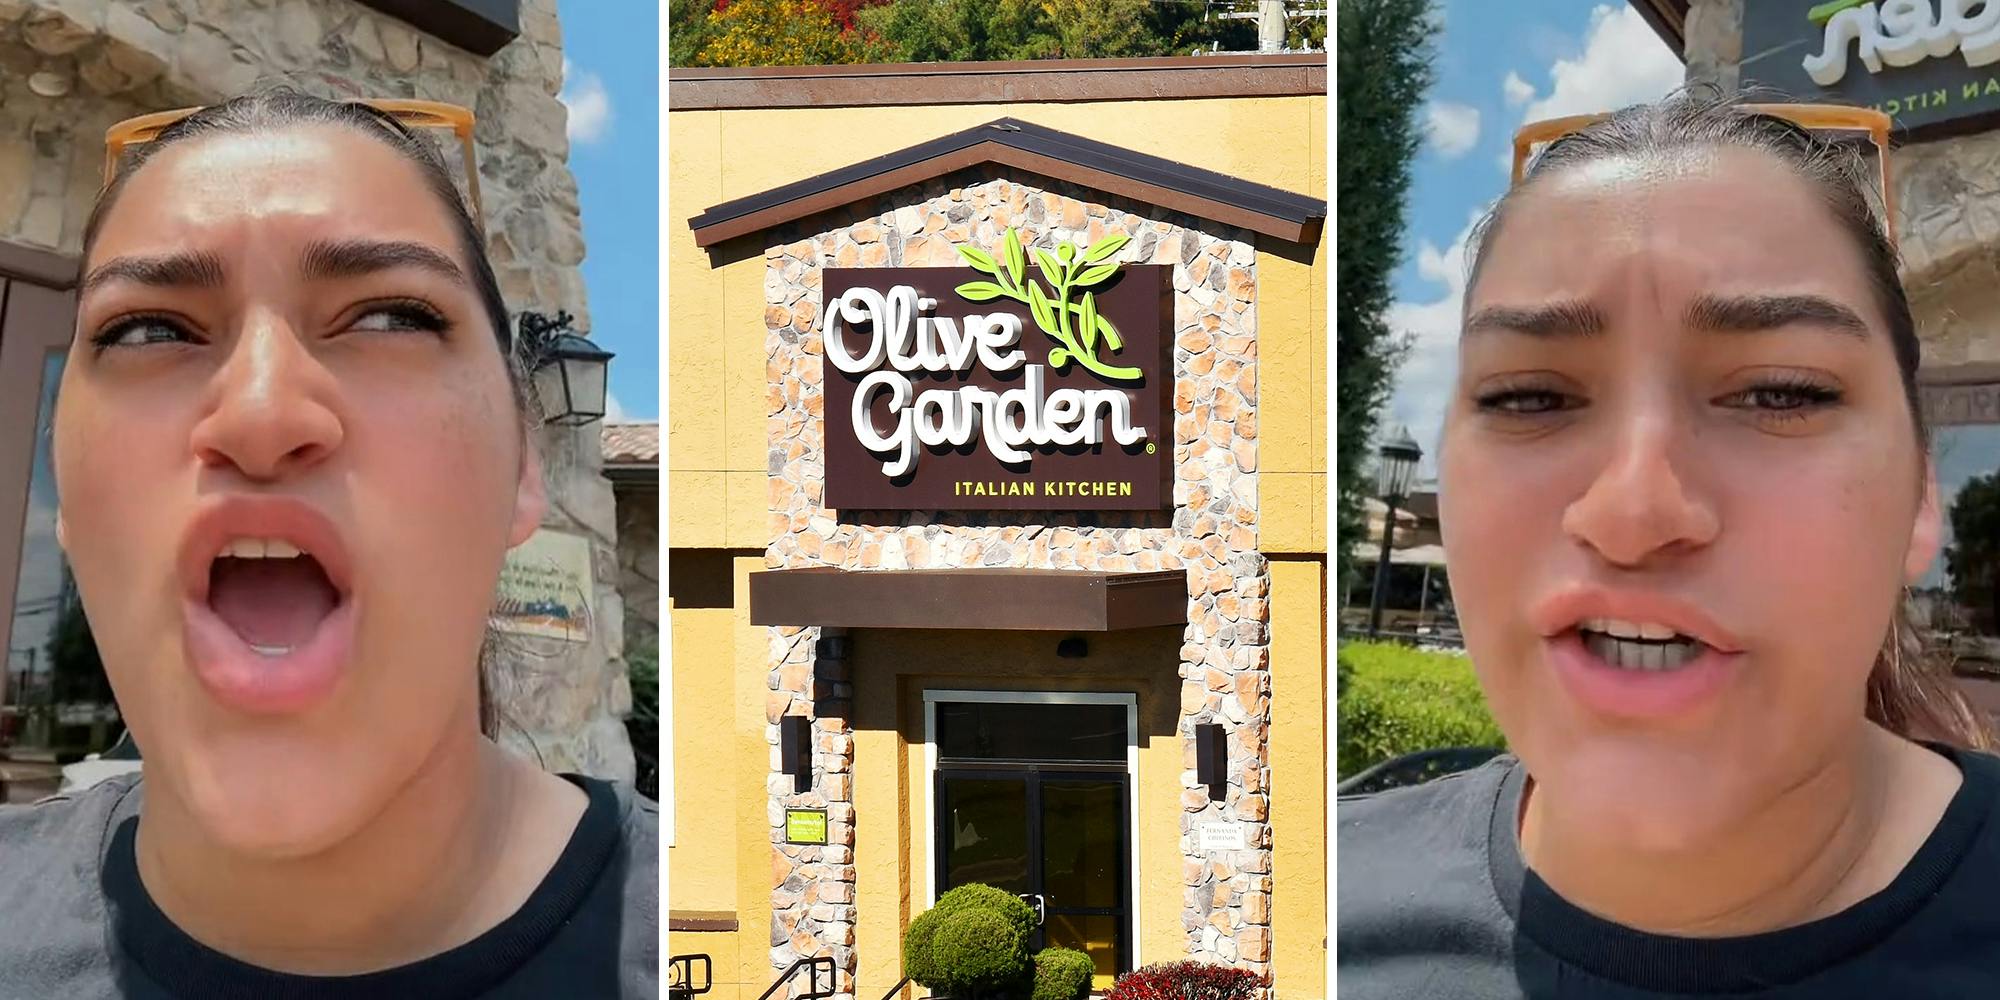 Customer says Olive Garden manager retaliated against her because she used to work there